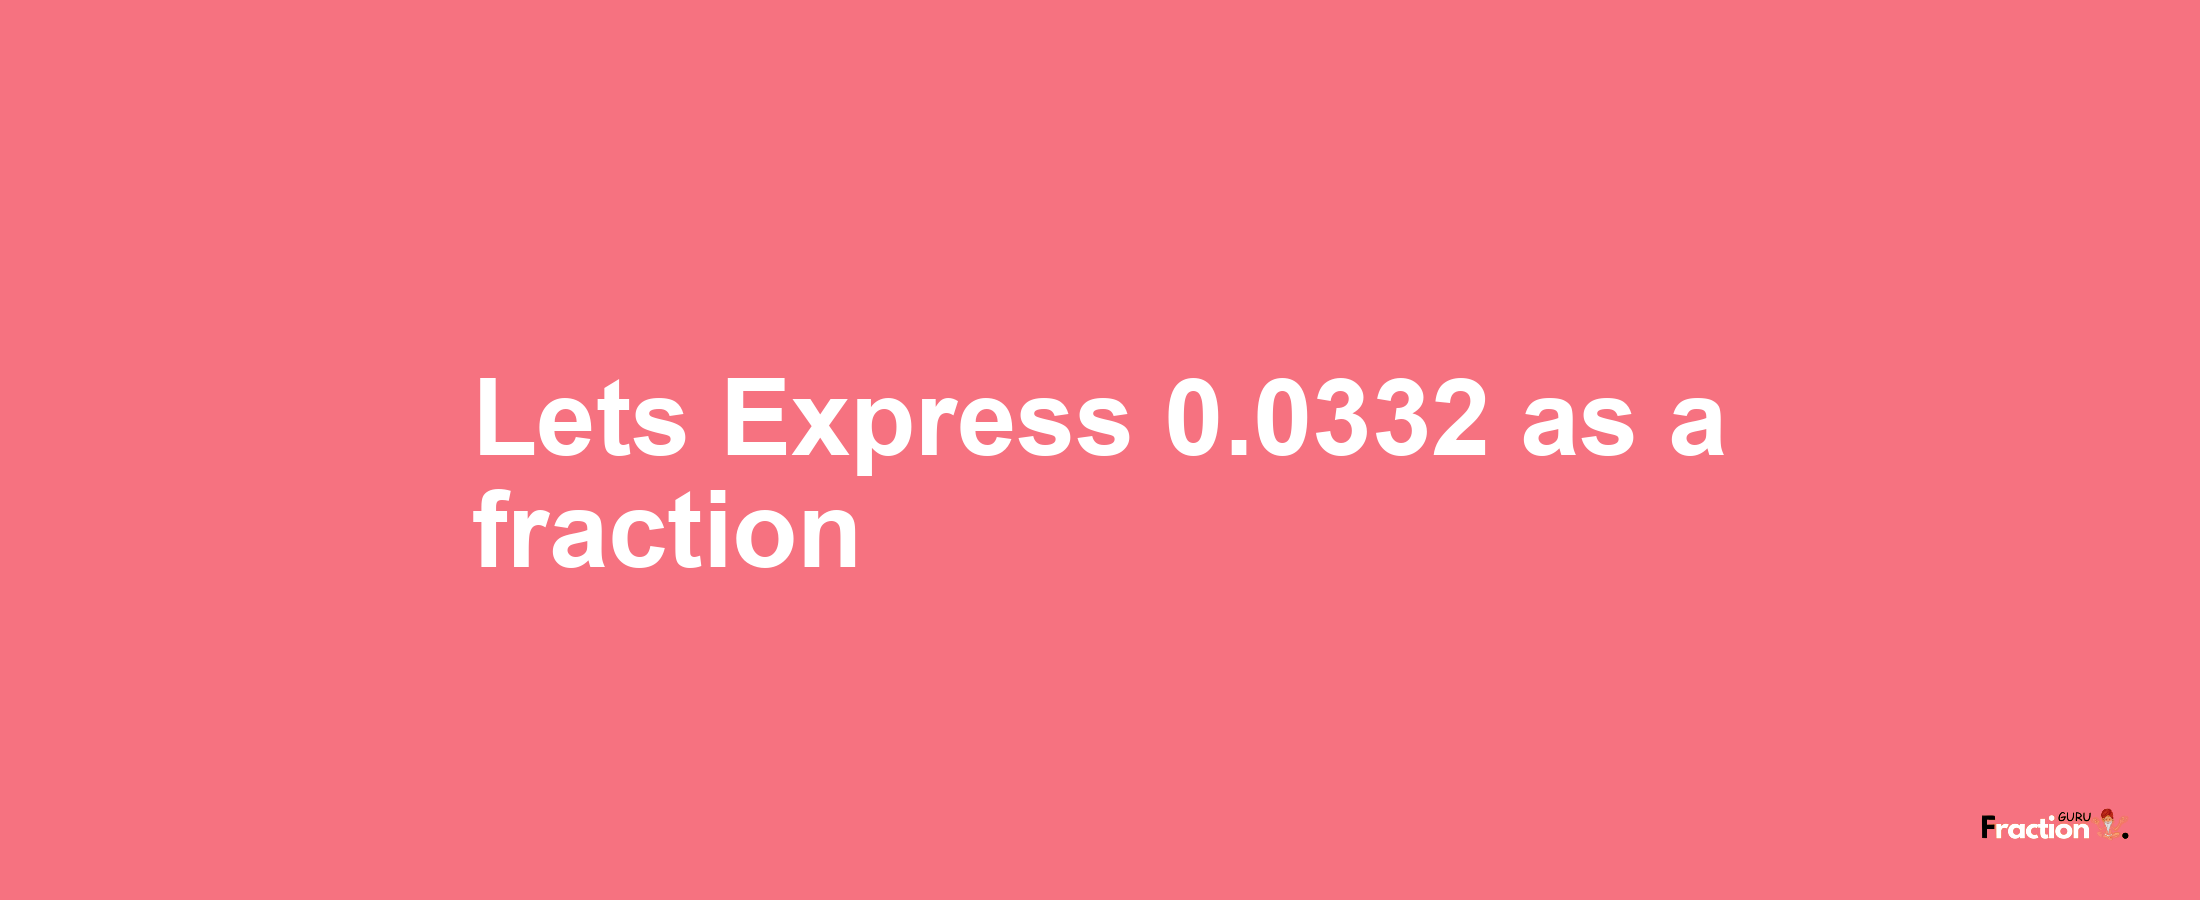 Lets Express 0.0332 as afraction